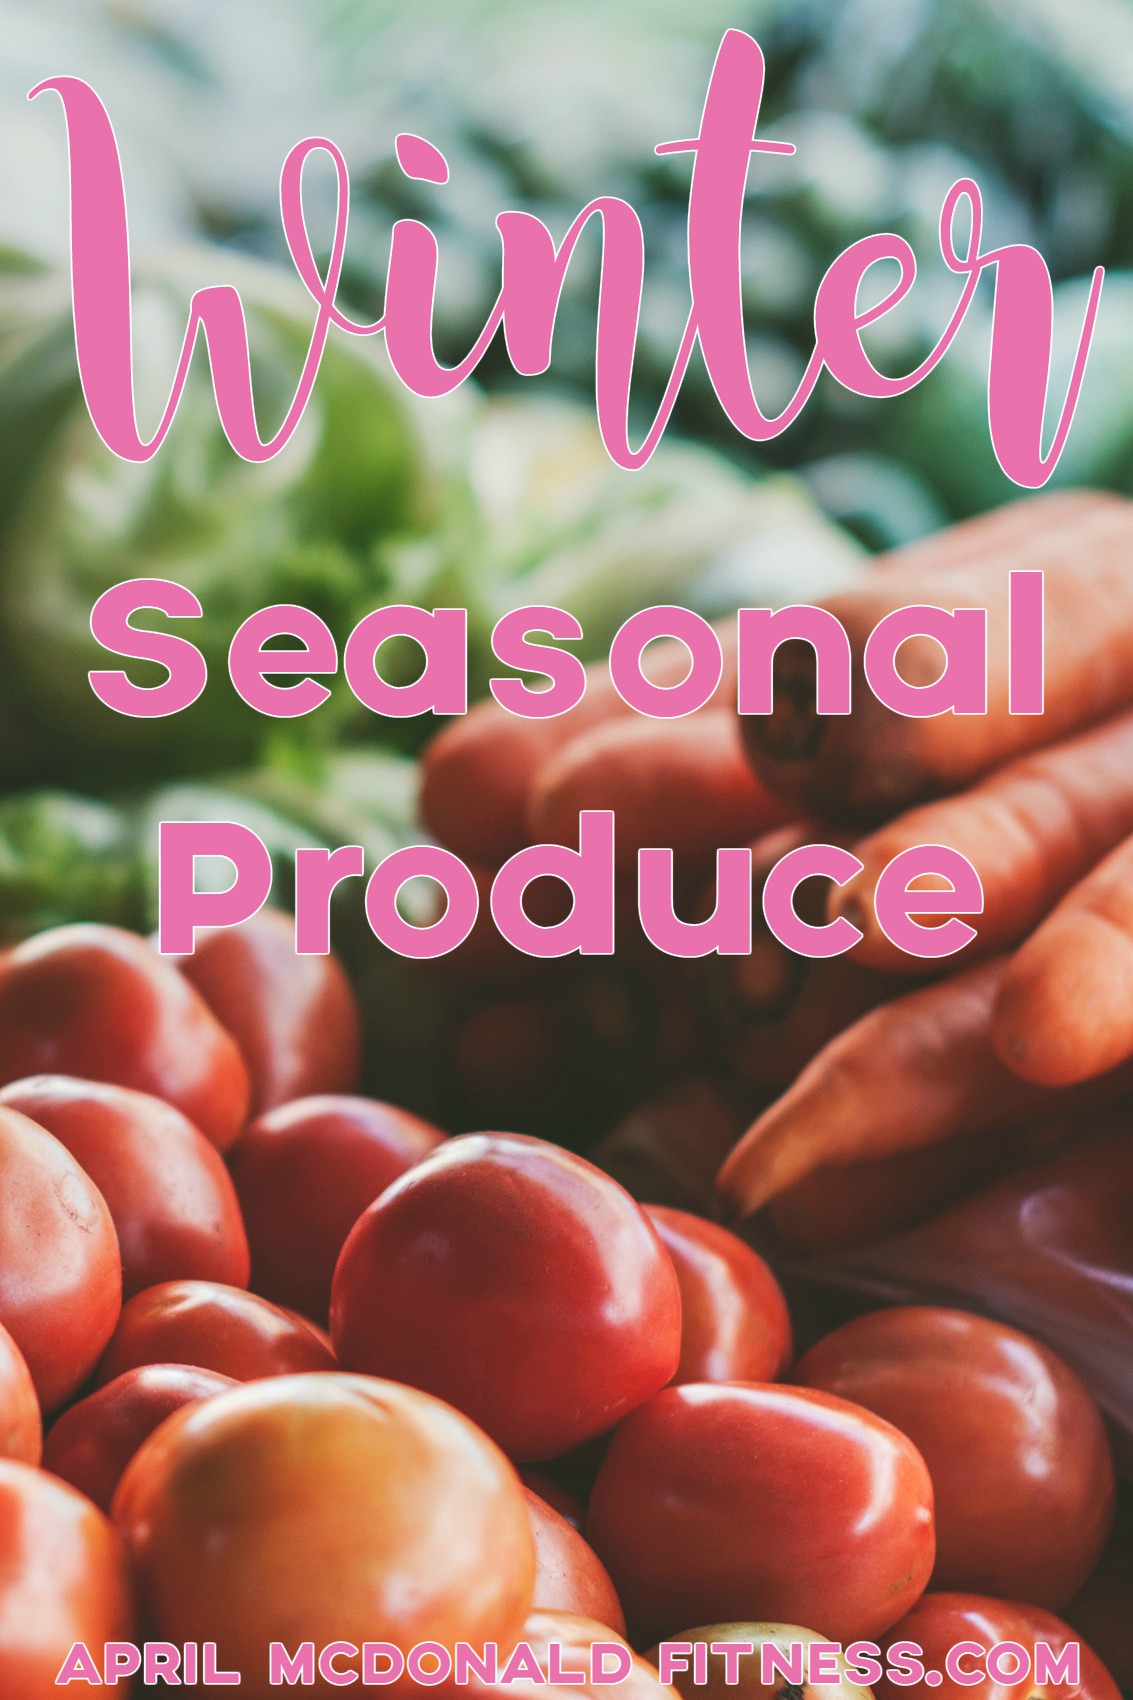 Just because it's winter doesn't mean that there isn't any fresh produce. There is plenty of seasonal produce available in December, January, and February. Take advantage of these super healthy fresh fruits and veggies in your winter and holiday diet!